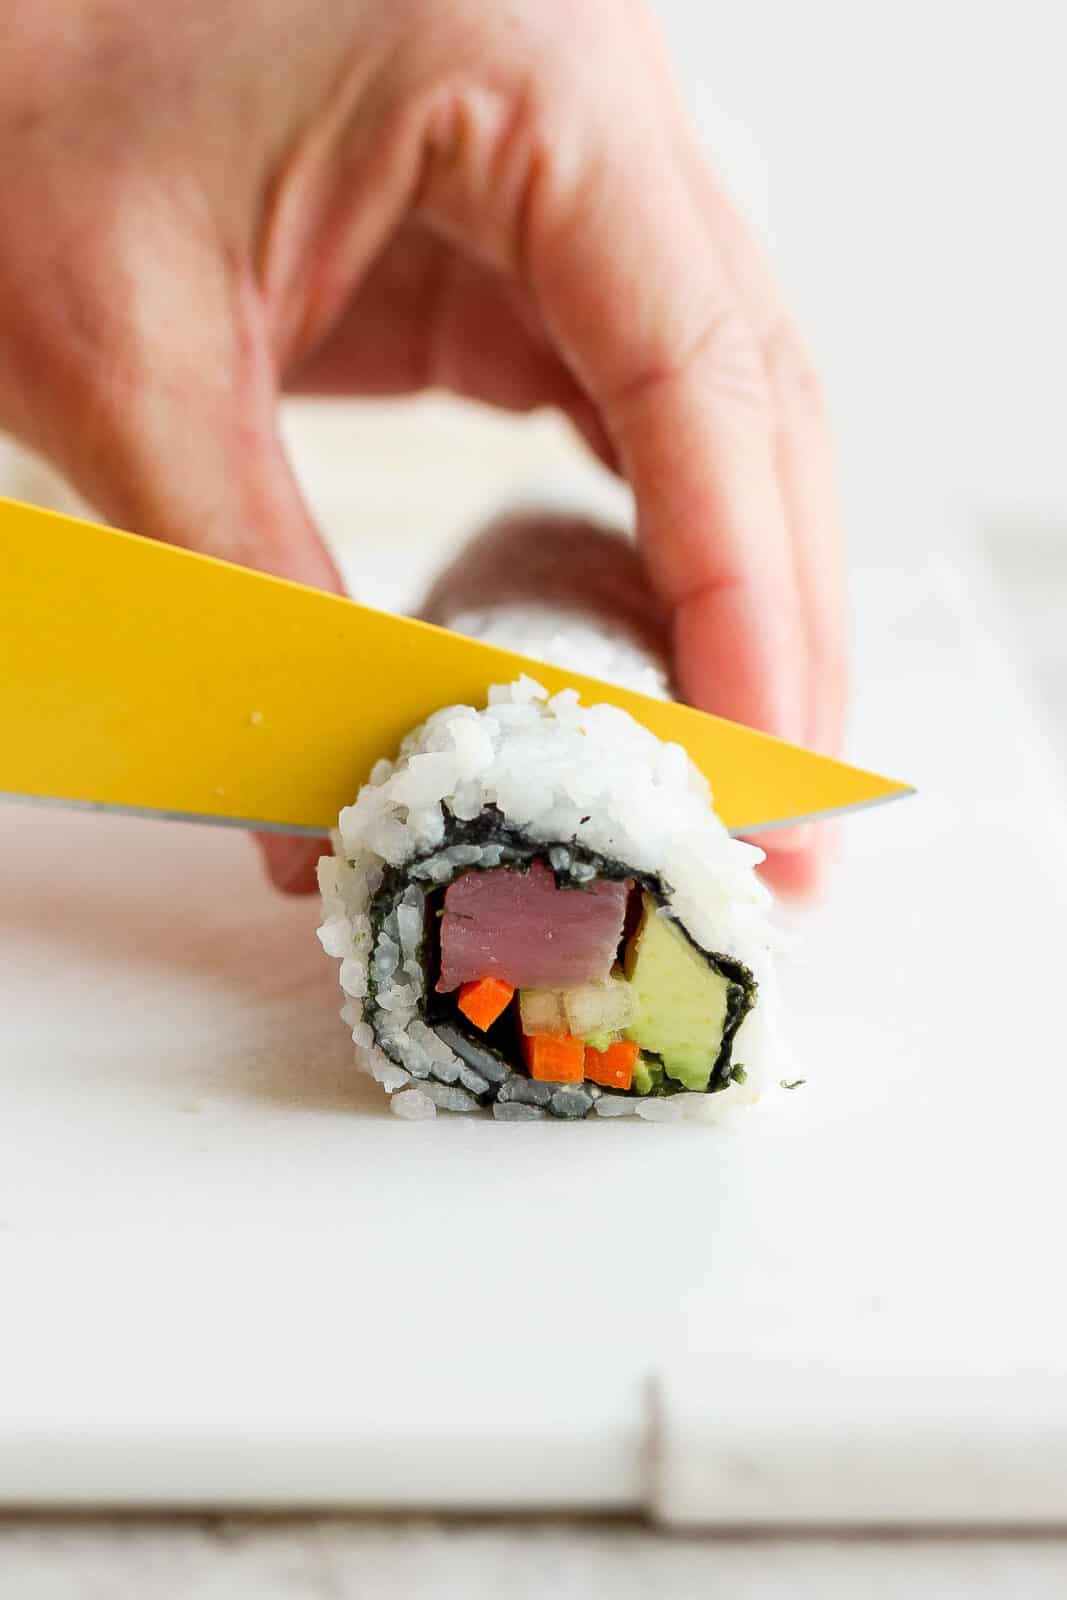 A sharp knife cutting the sushi roll into pieces.